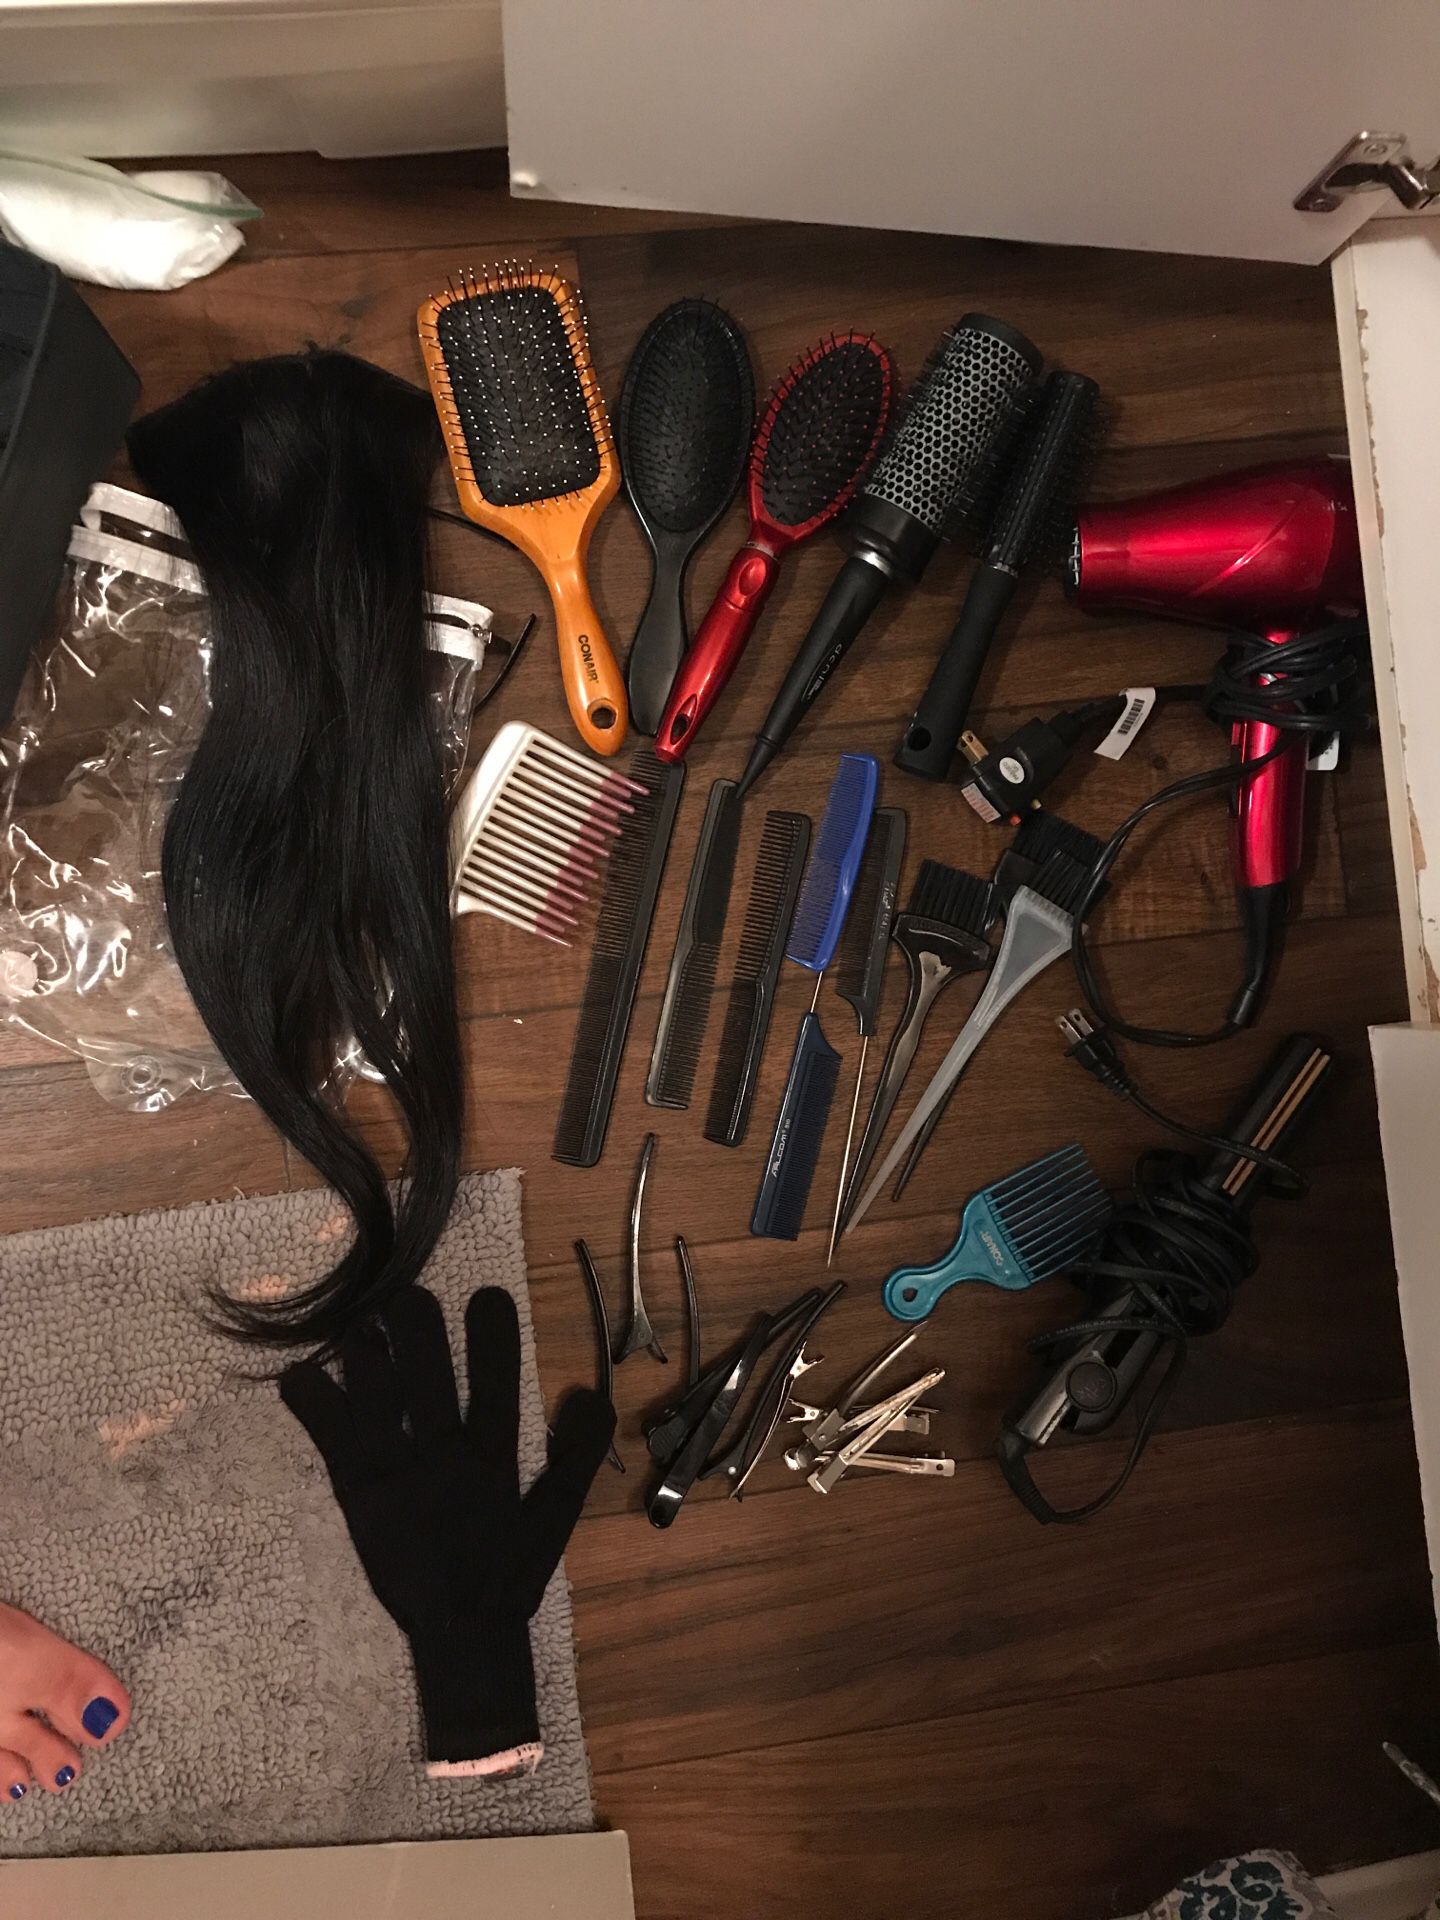 Hair stuff everything must go for $100